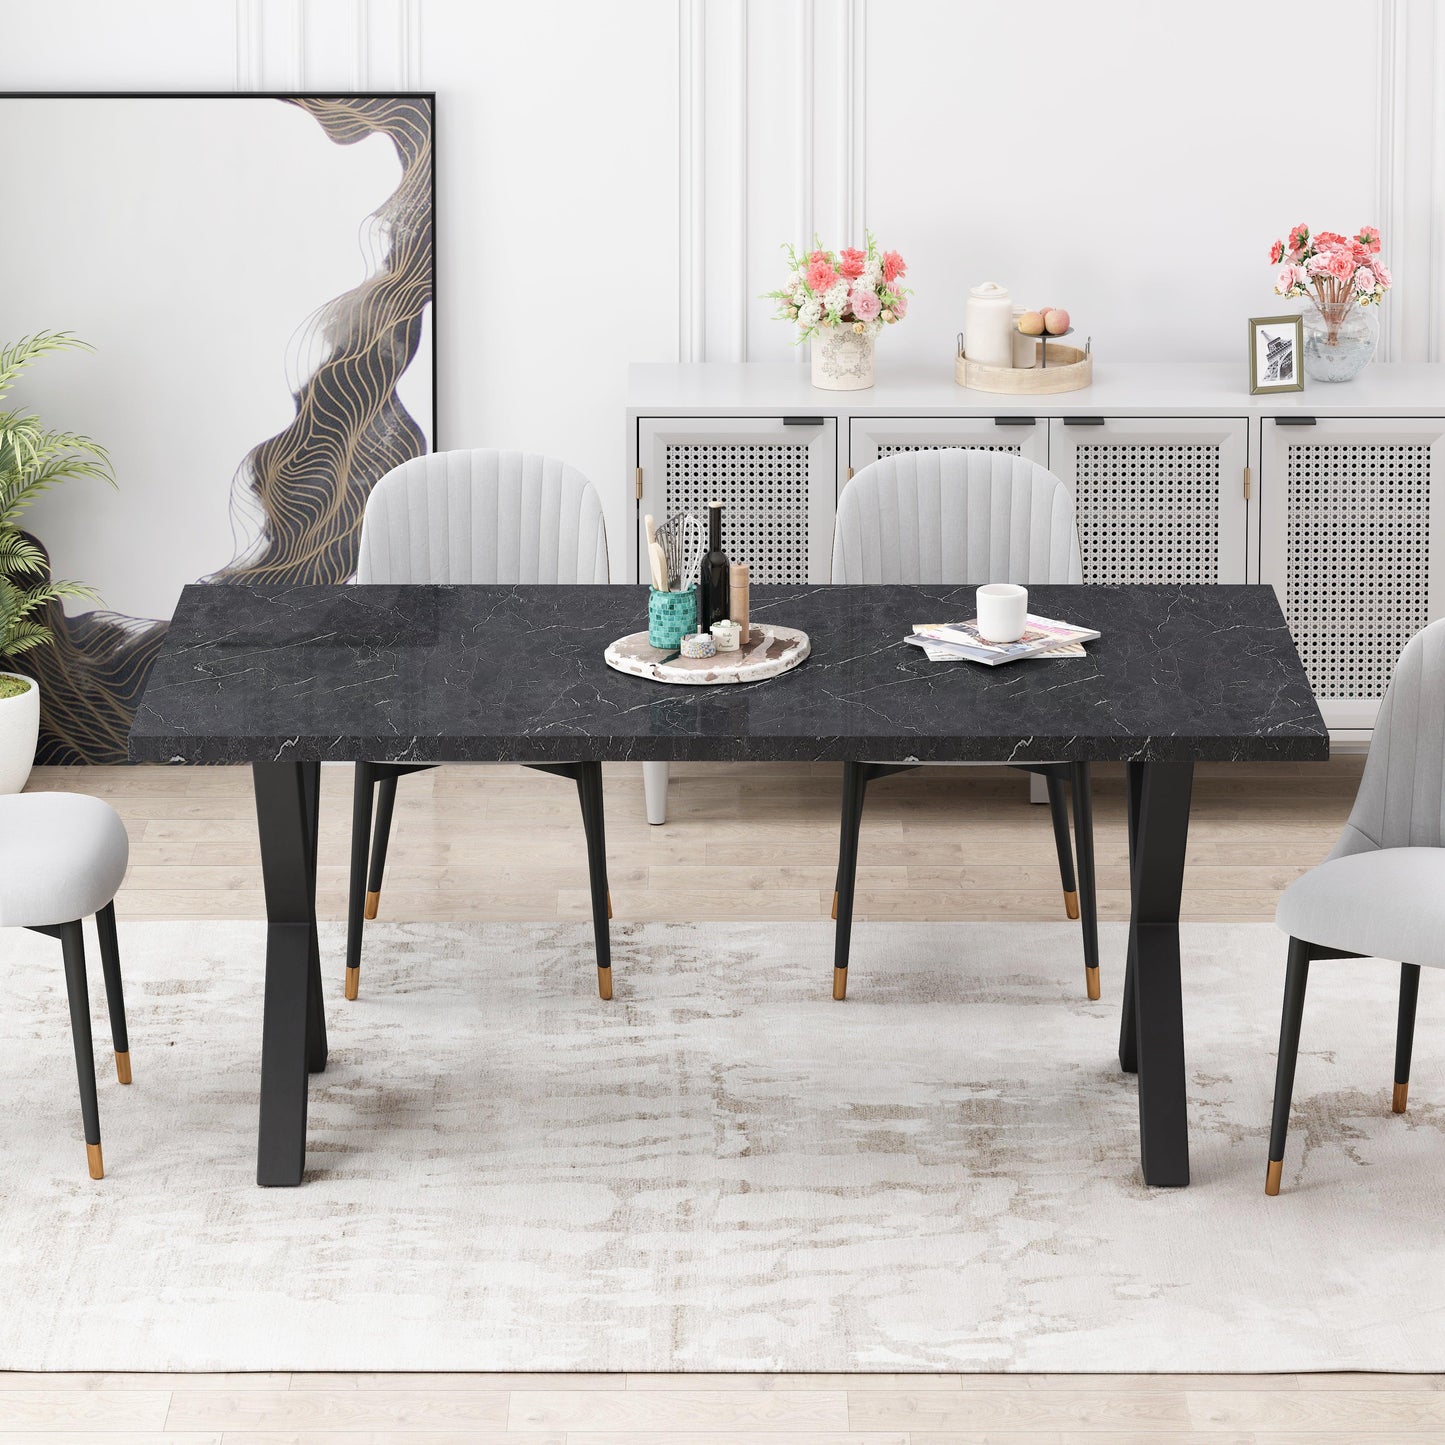 70.87"Modern Square Dining Table with Printed Black Marble Table Top+Black X-Shape Table Leg - FurniFindUSA